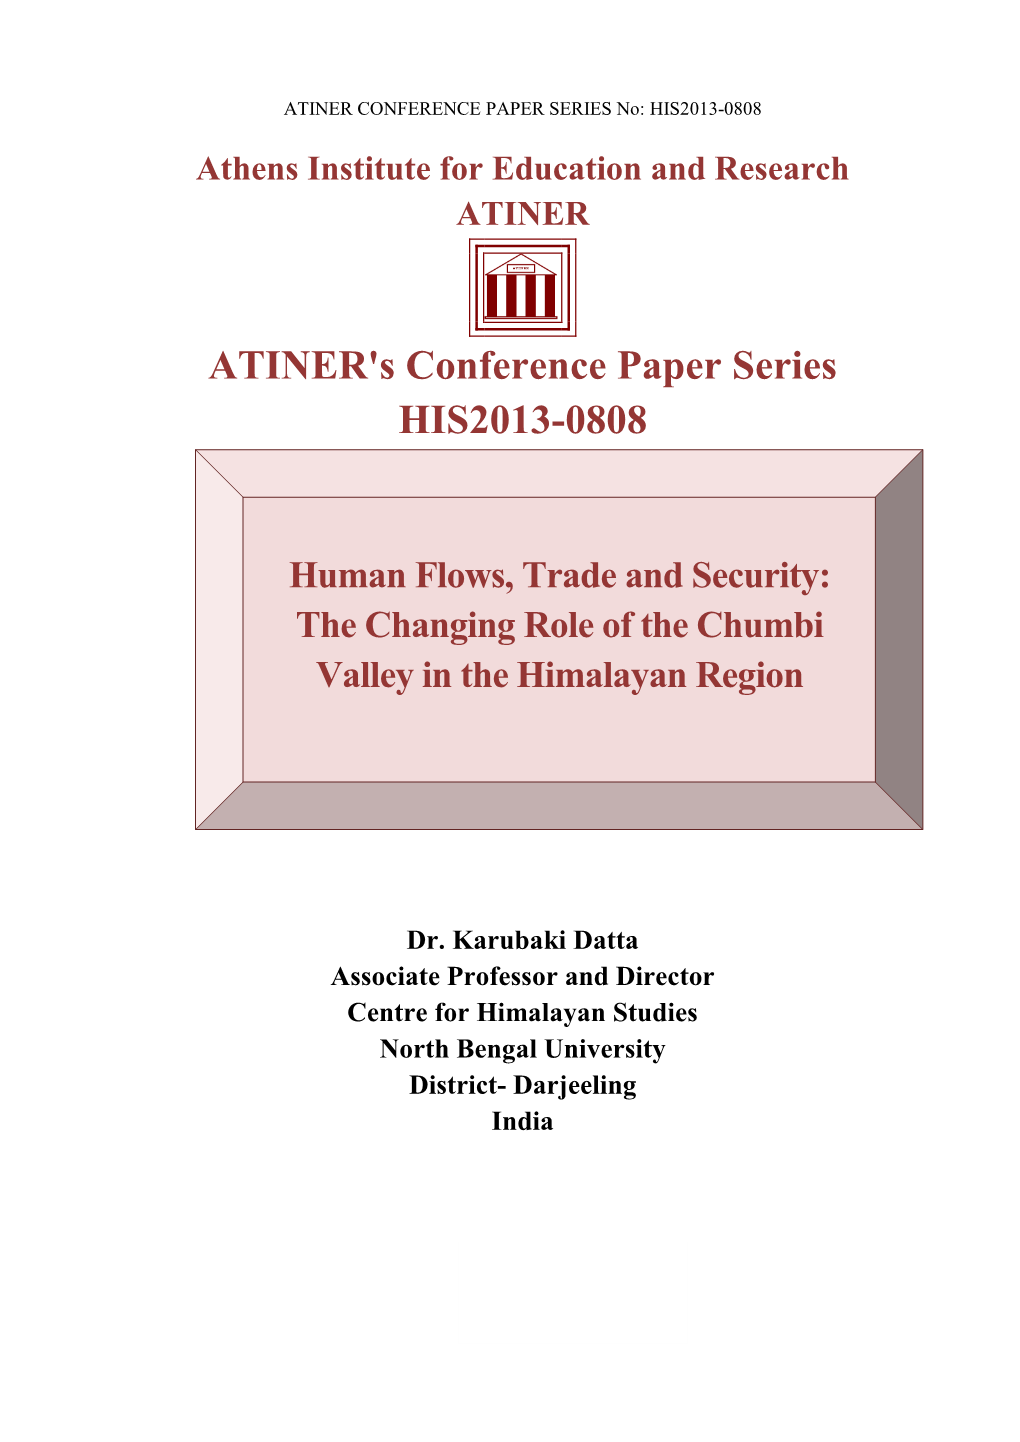 ATINER's Conference Paper Series HIS2013-0808